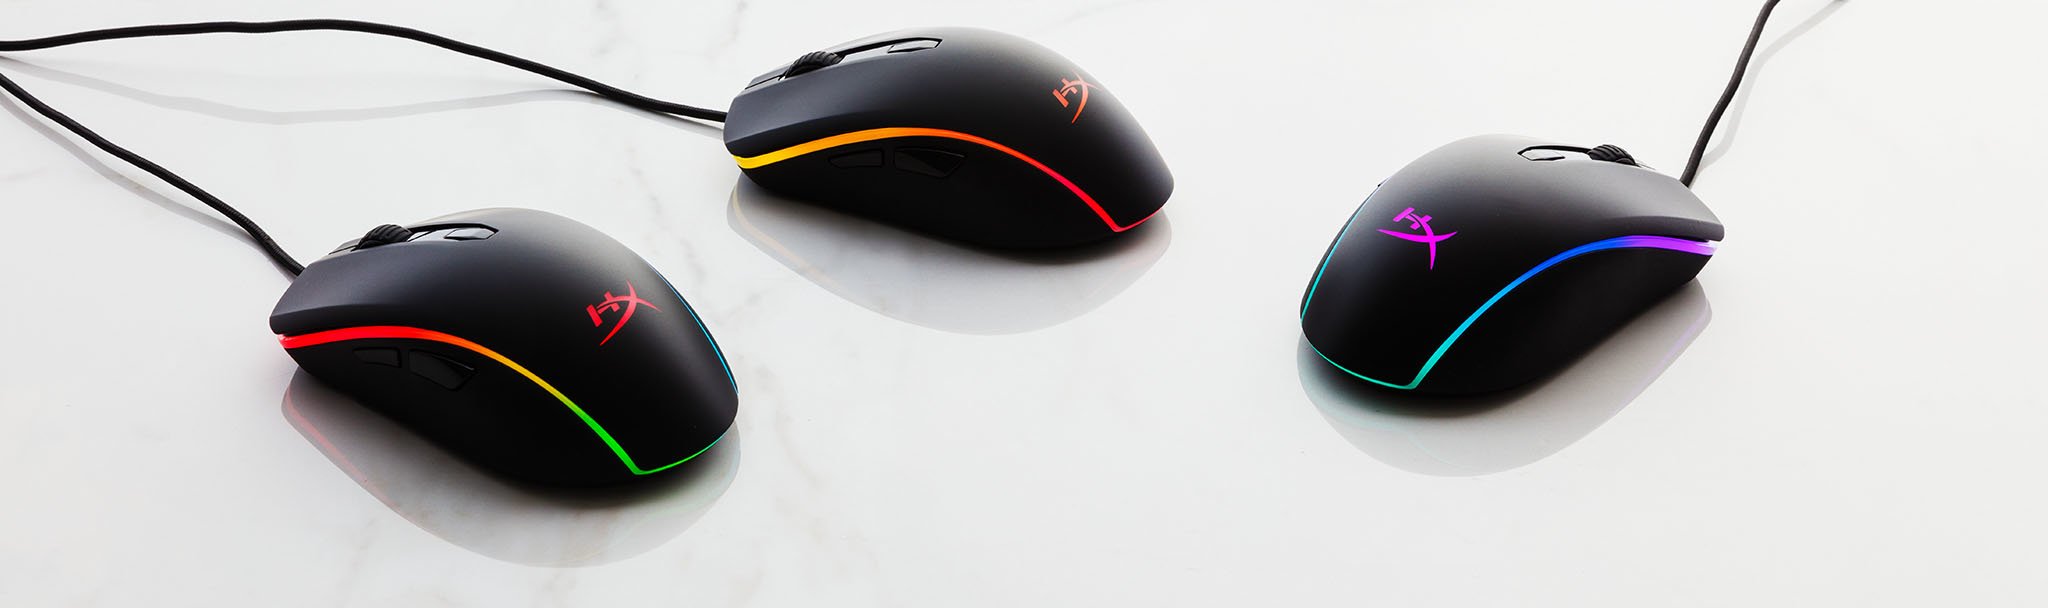 HyperX Pulsefire Surge the RGB - RGB best yet? TECHJUNKIES Gaming mouse Mouse 